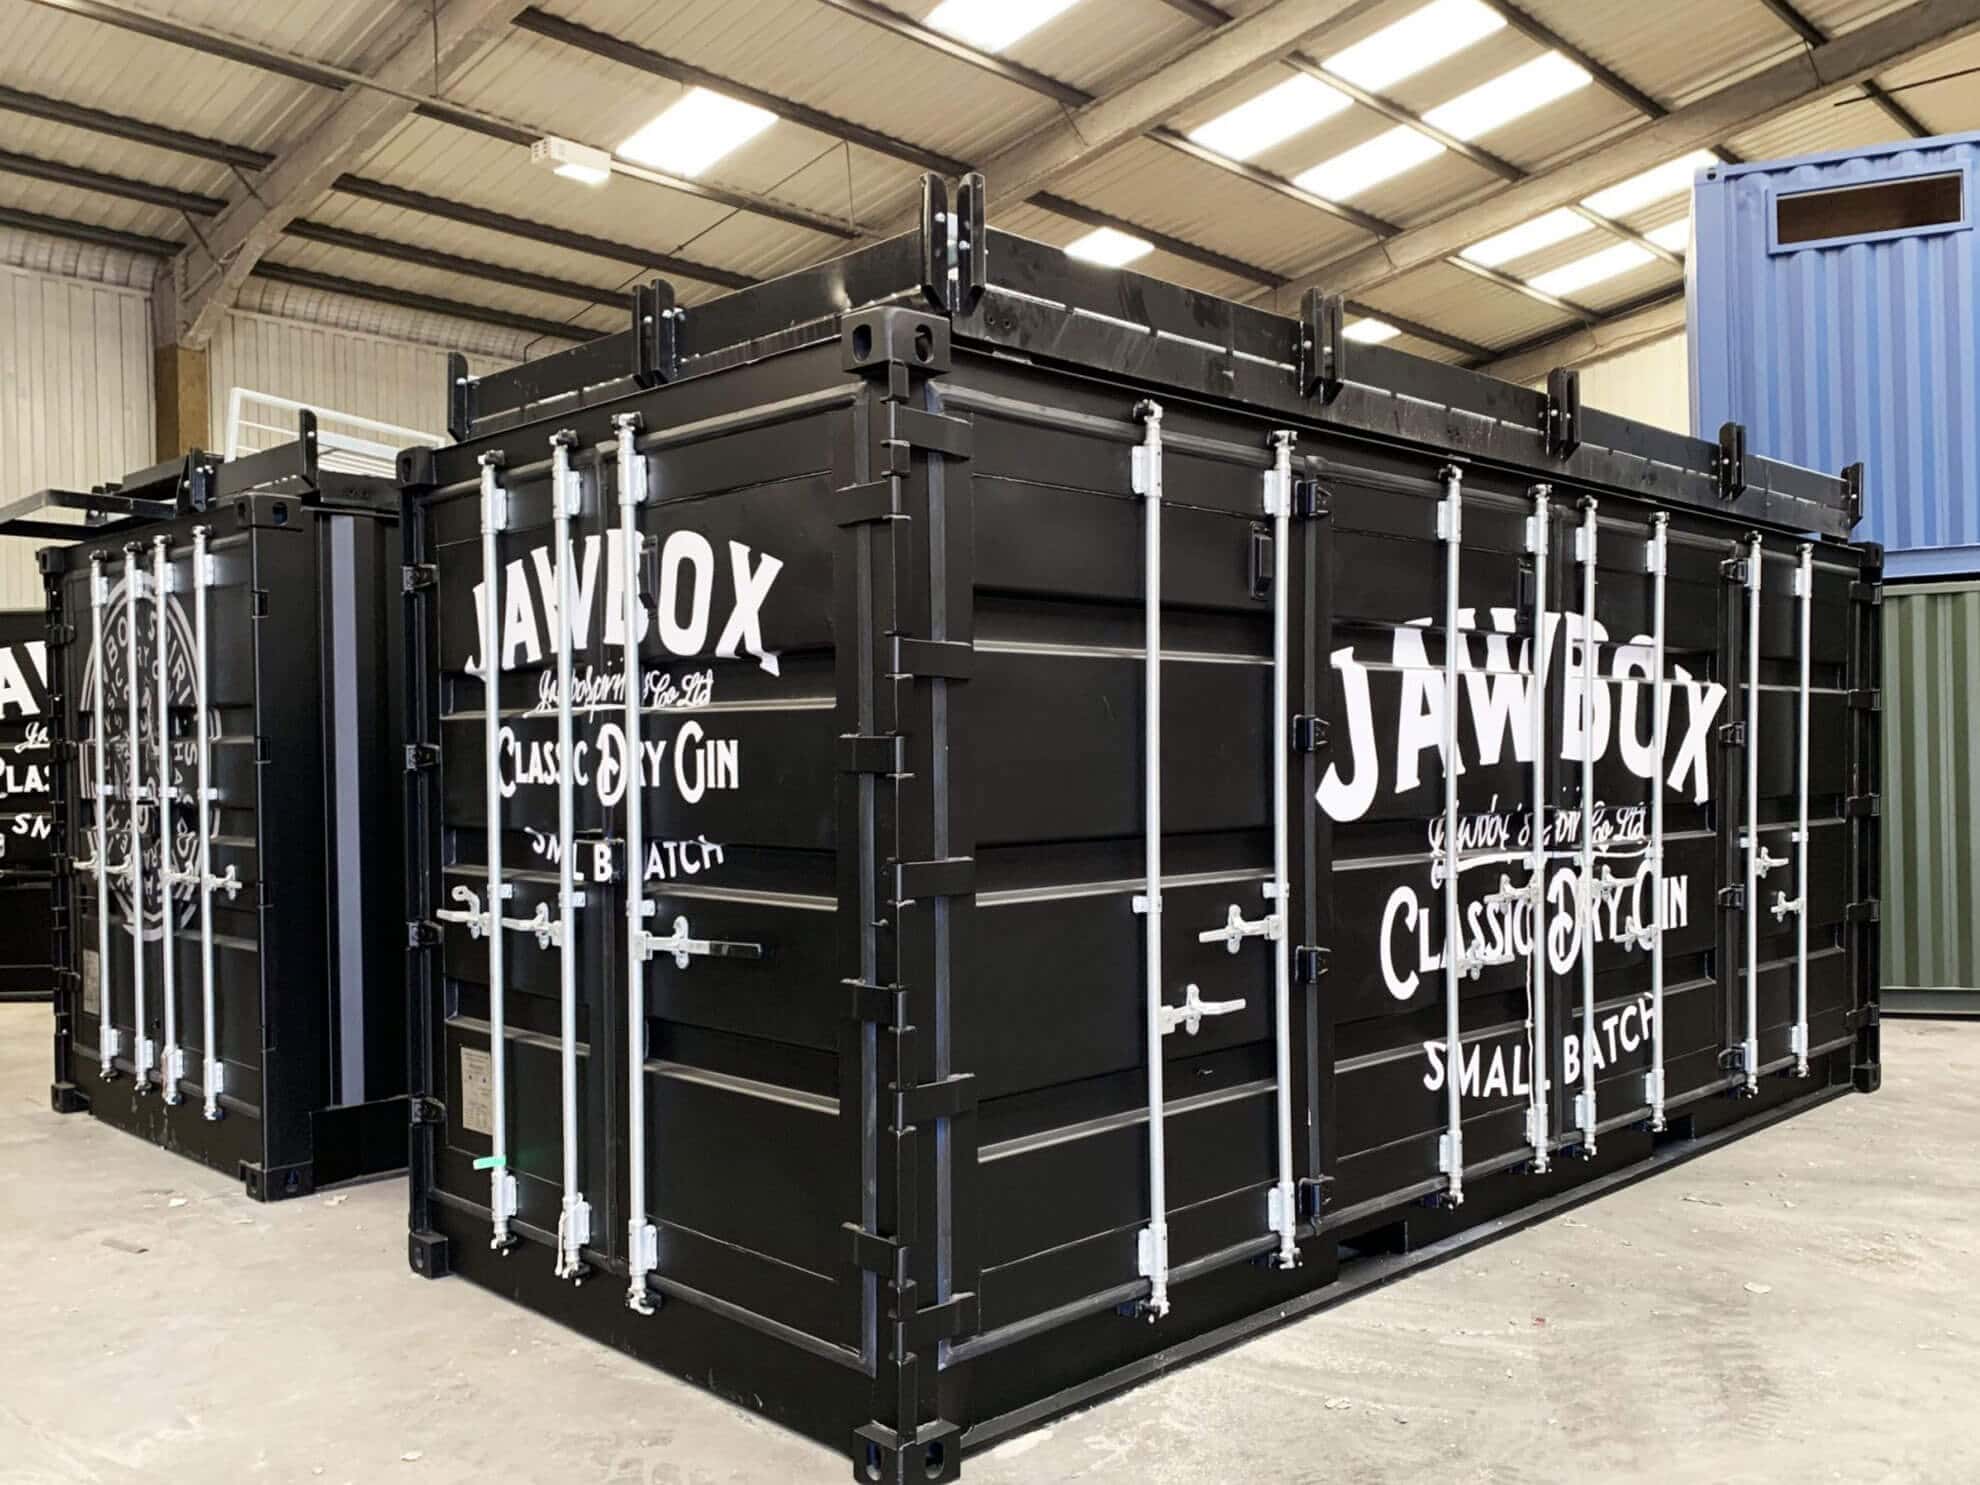 Jawbox Classic Dry Jin - Branded shipping container